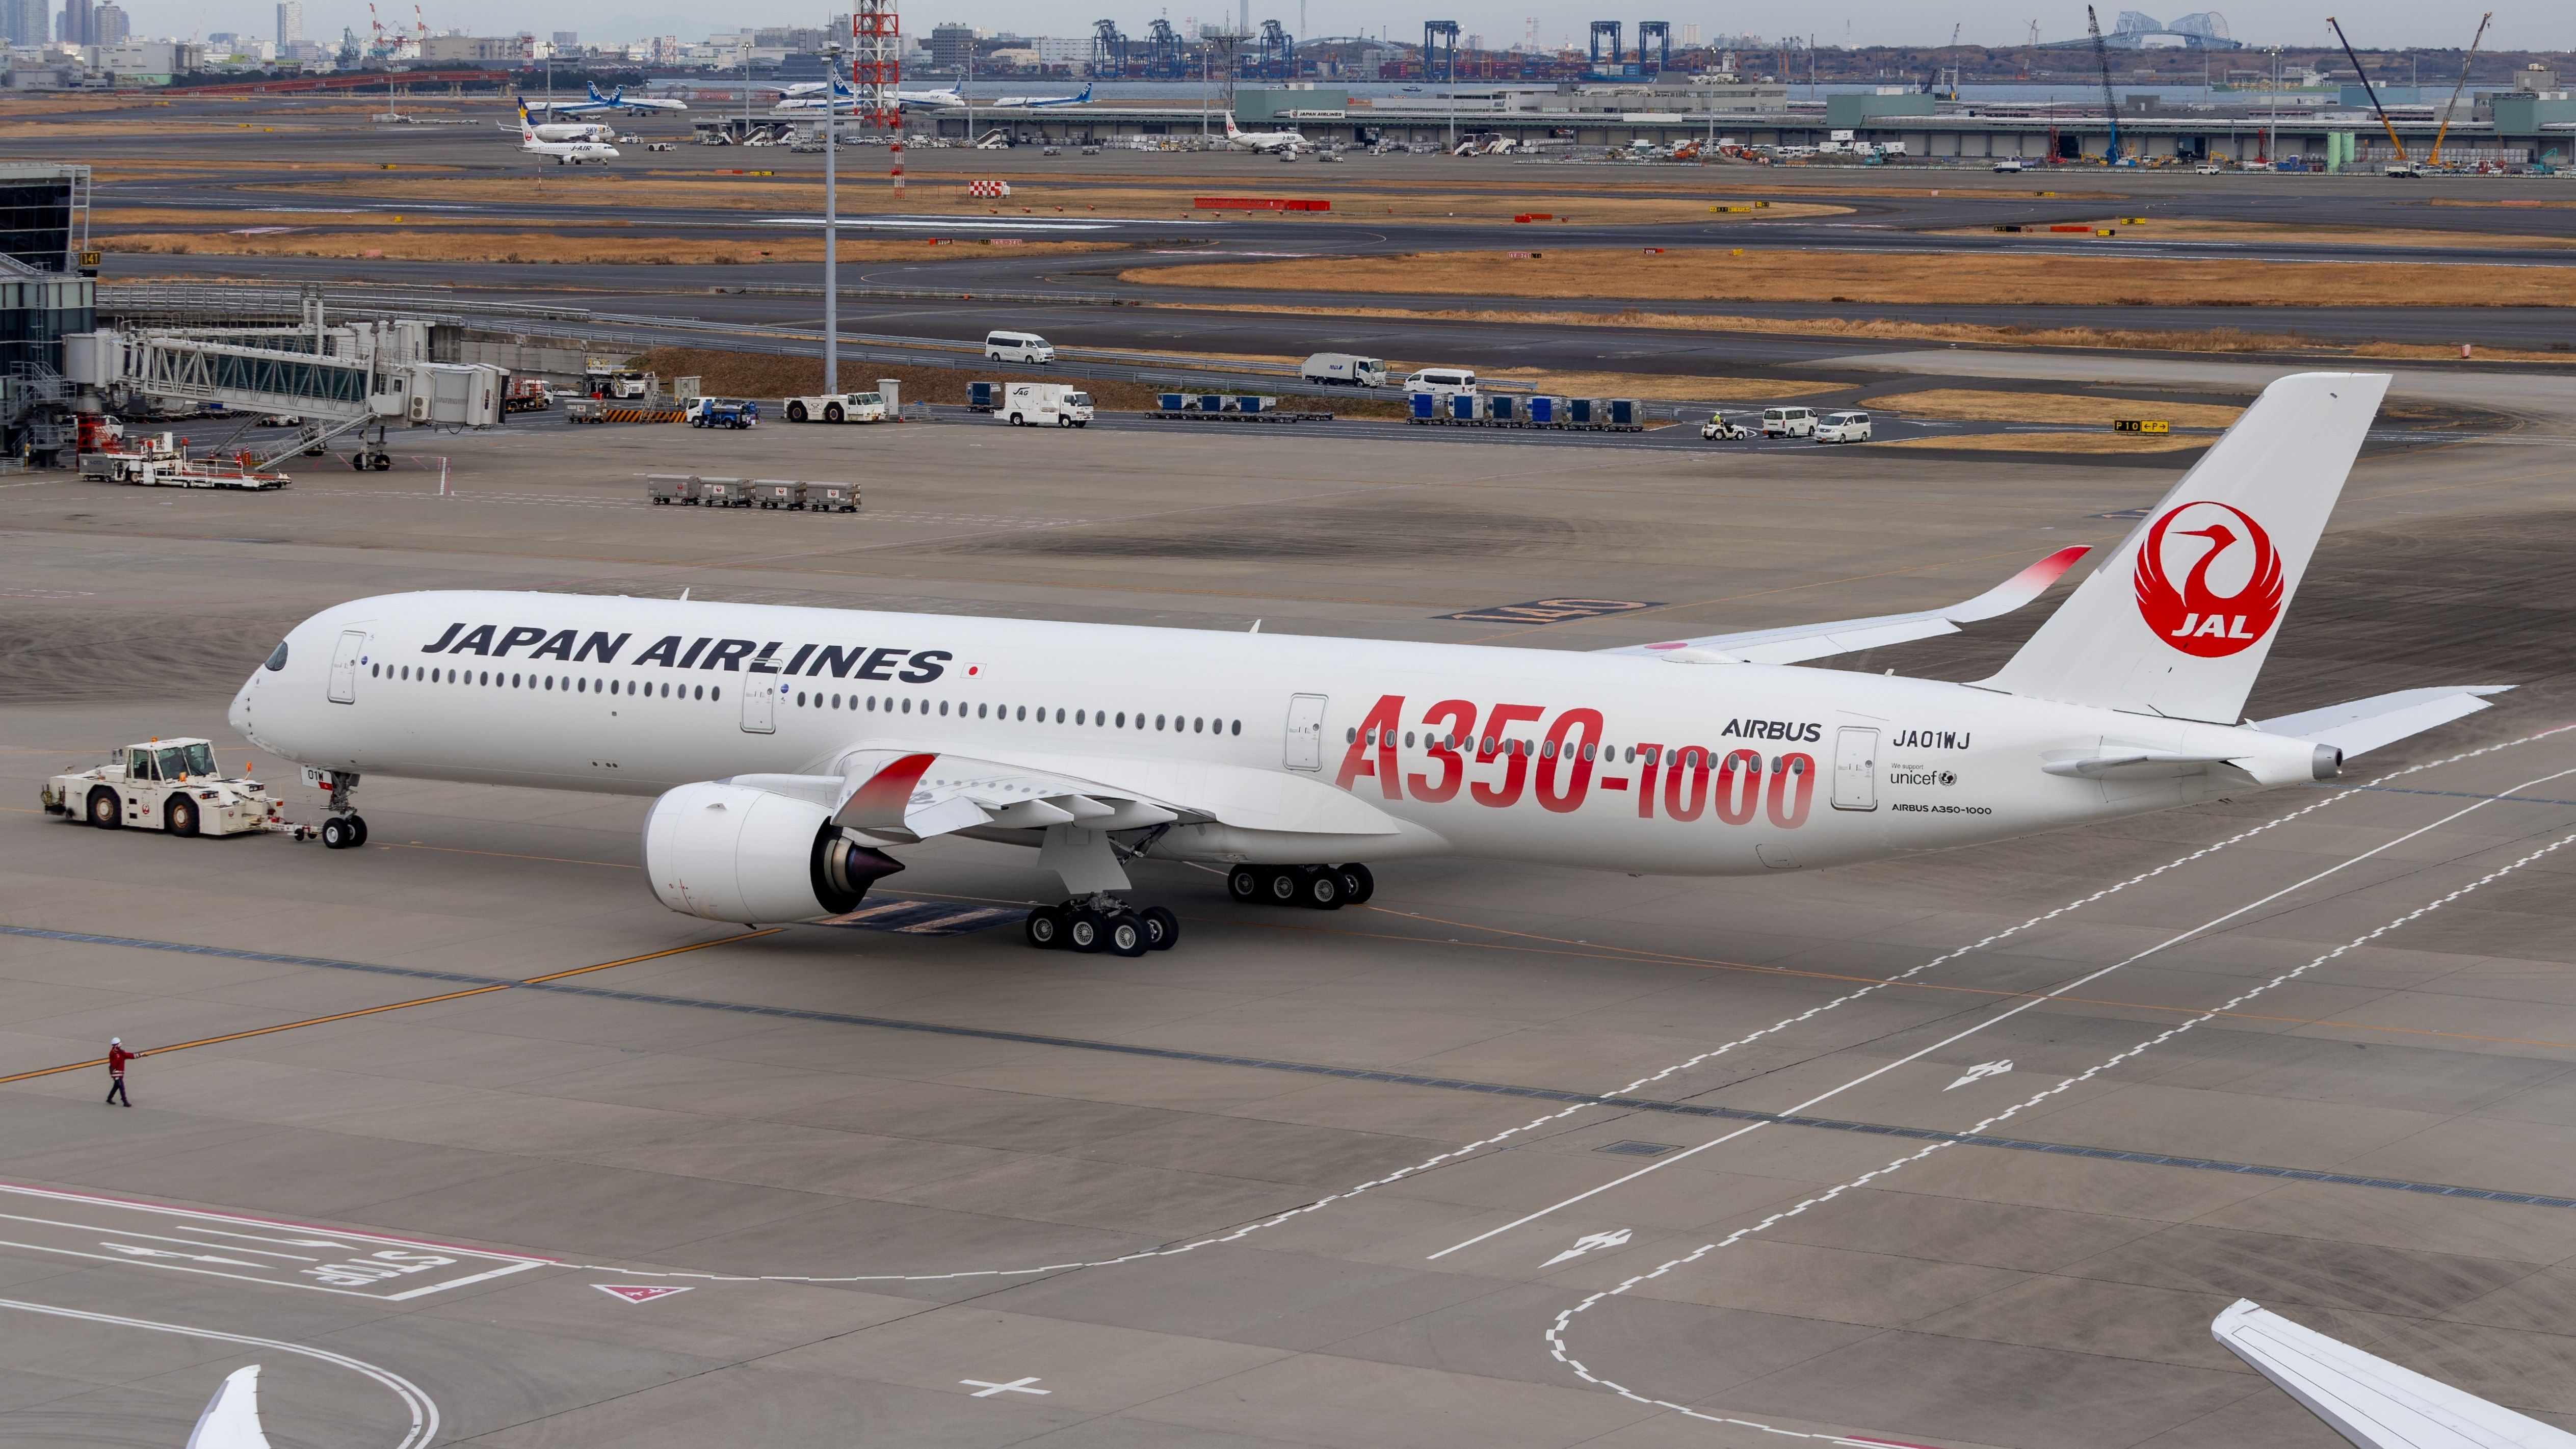 2nd Airbus A350-1000 Route: Japan Airlines Adds Dallas Fort Worth 